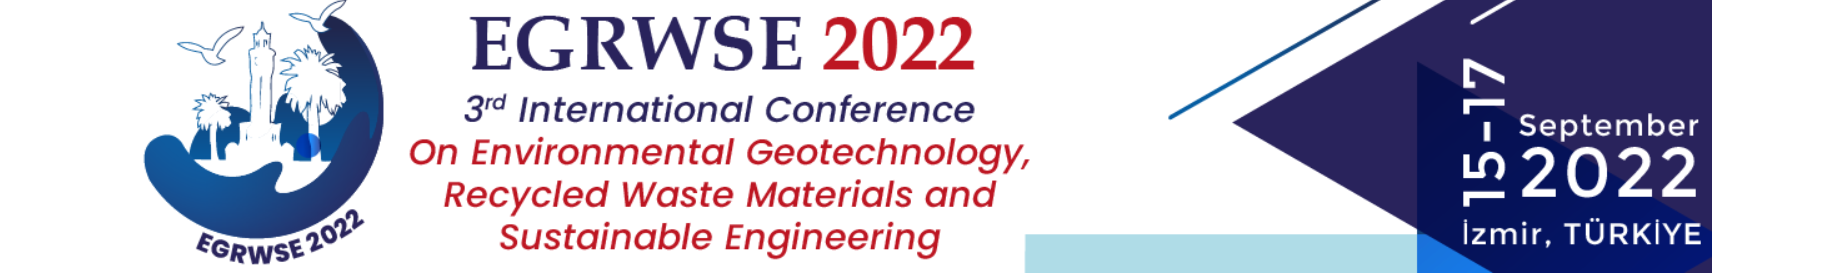 3. International Conference on Environmental Geotechnology  Recycled Waste Materials and Sustainable Engineering – EGRWSE 2022